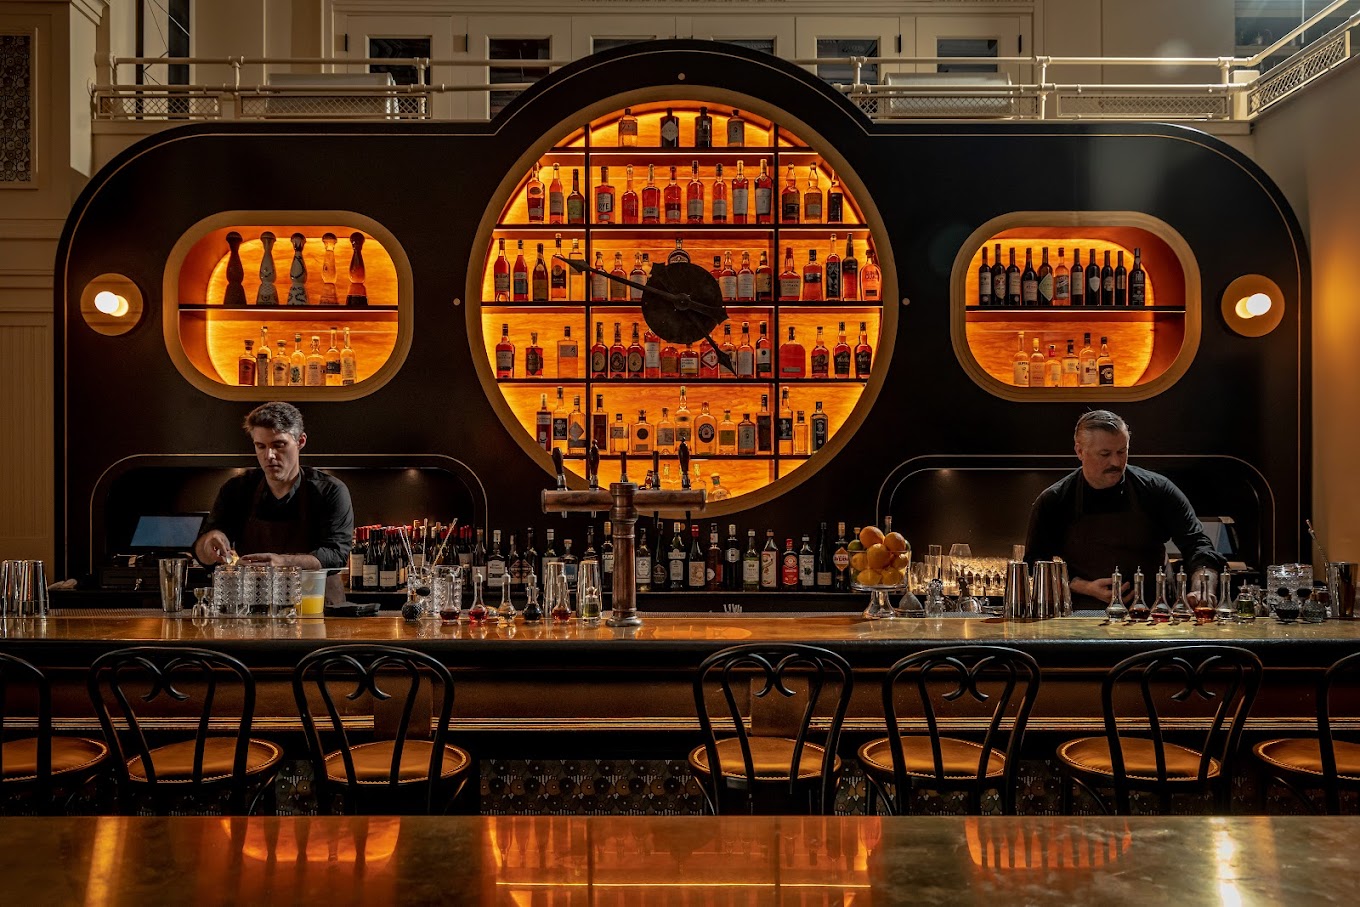 The black-and-gold barroom at Koloman, with a round central feature shaped like a clock face.